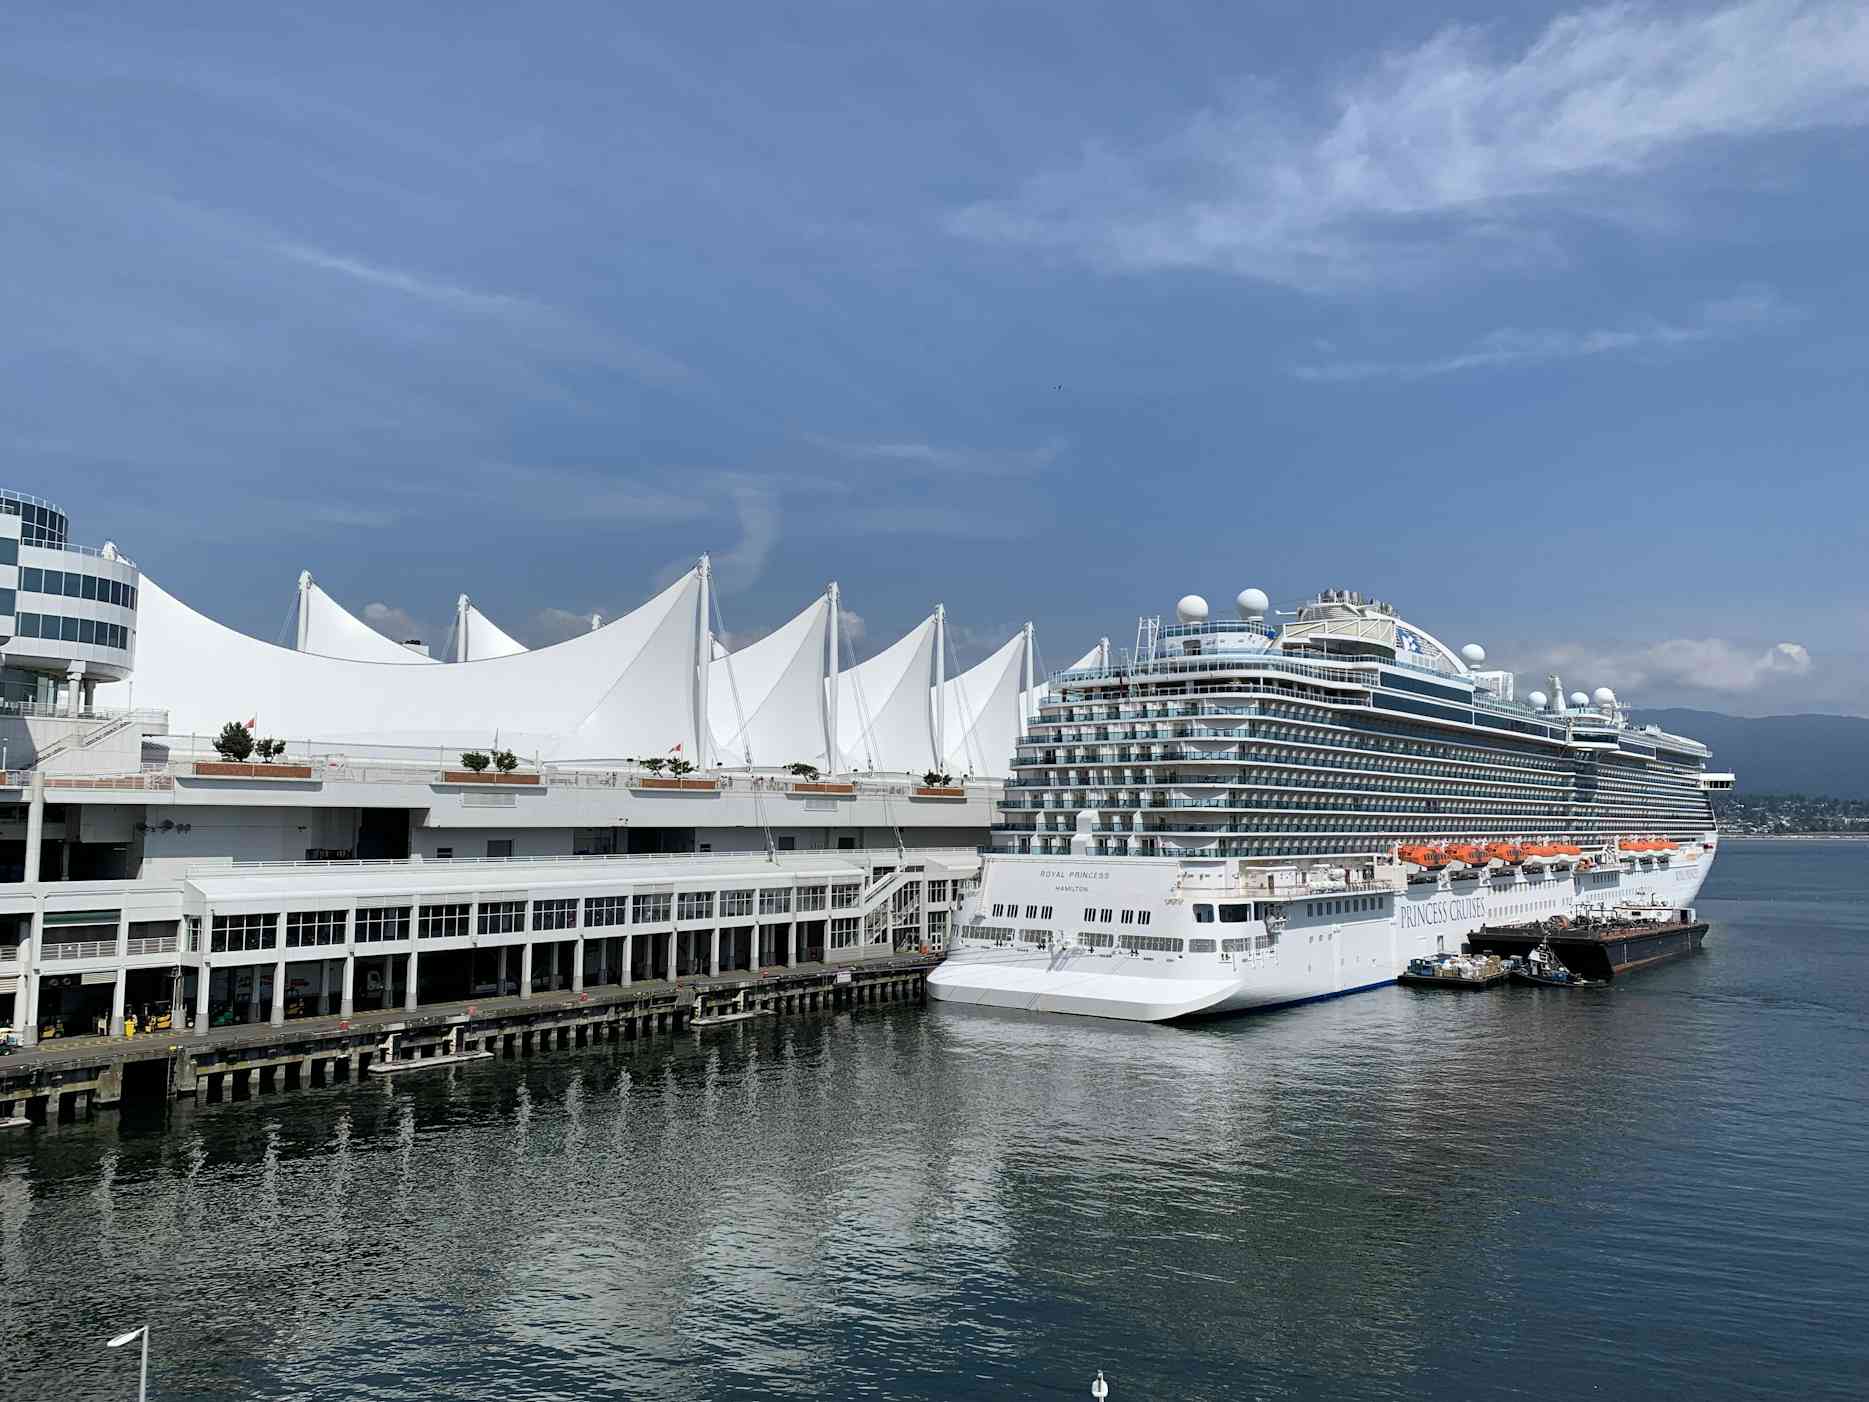 That Shopping Mall Where the Cruise Ships Dock - Review of